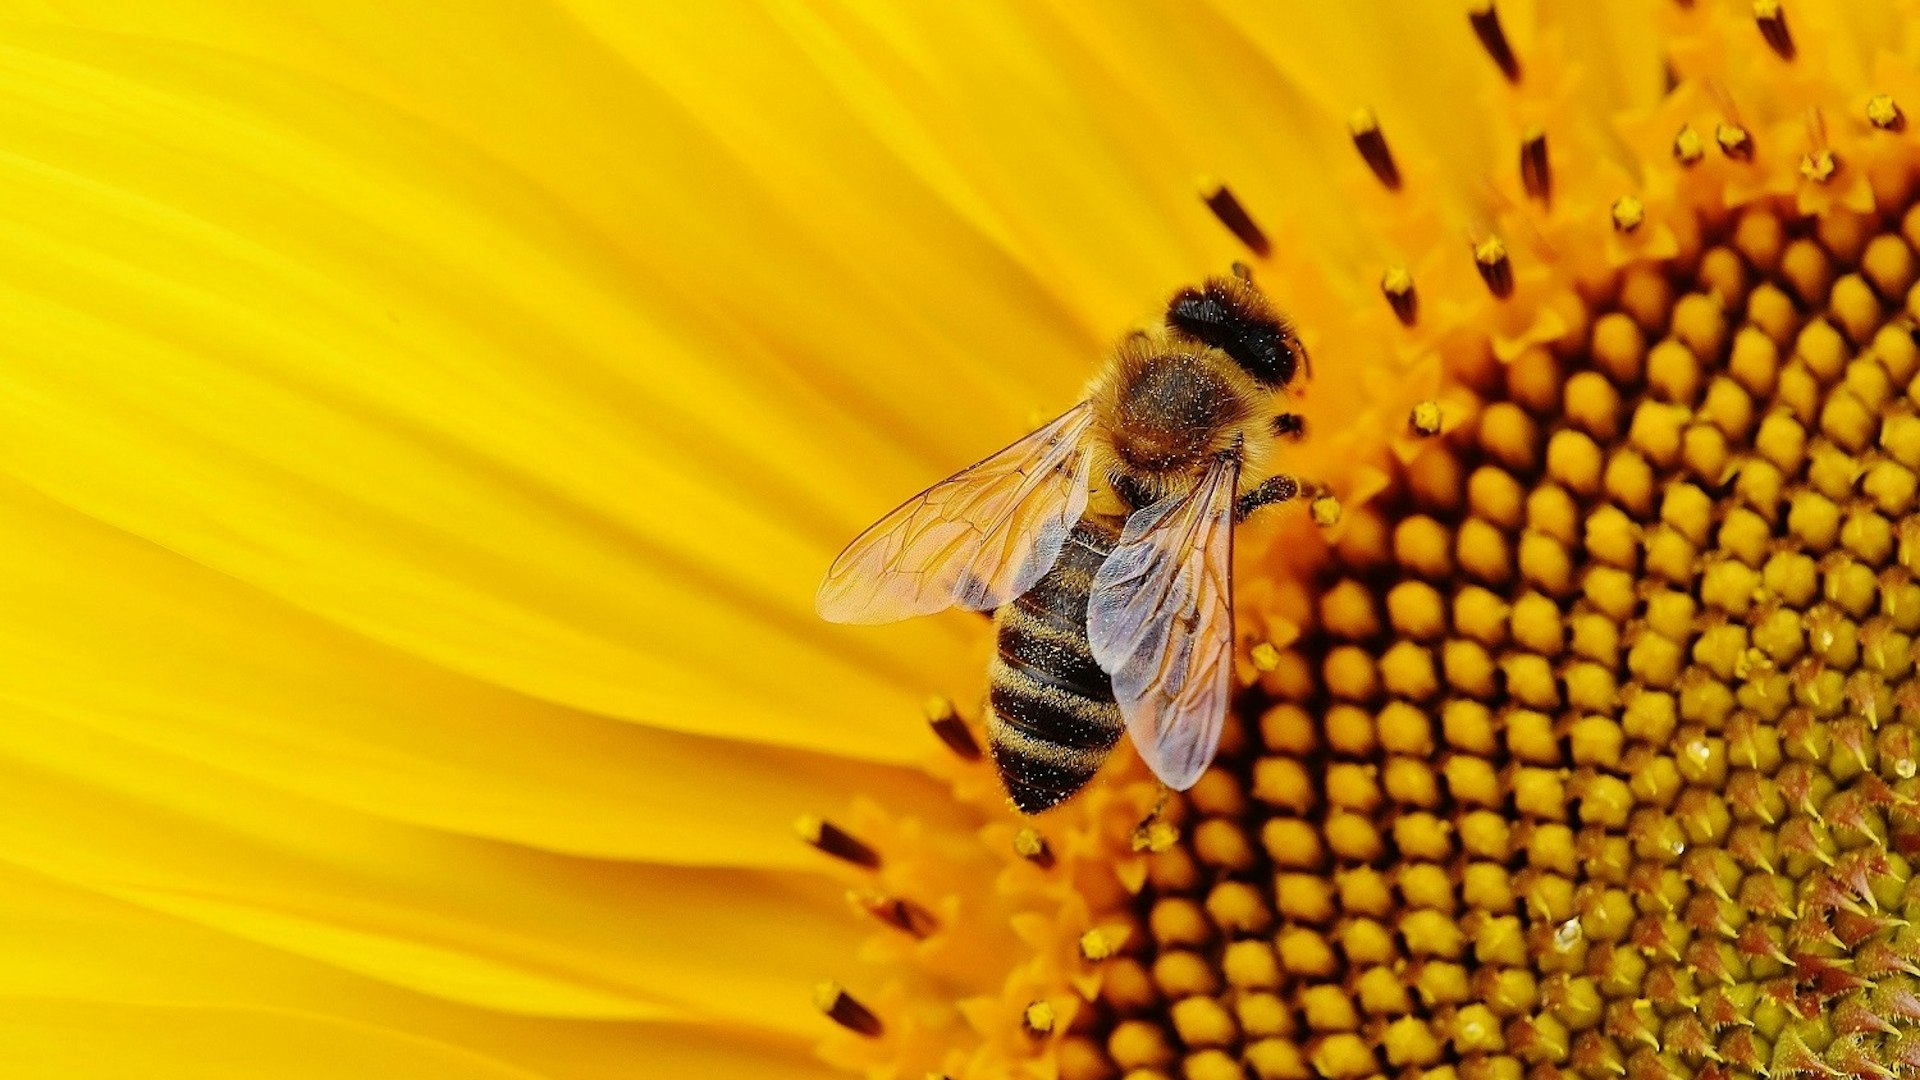 sunflower and a hoverfly